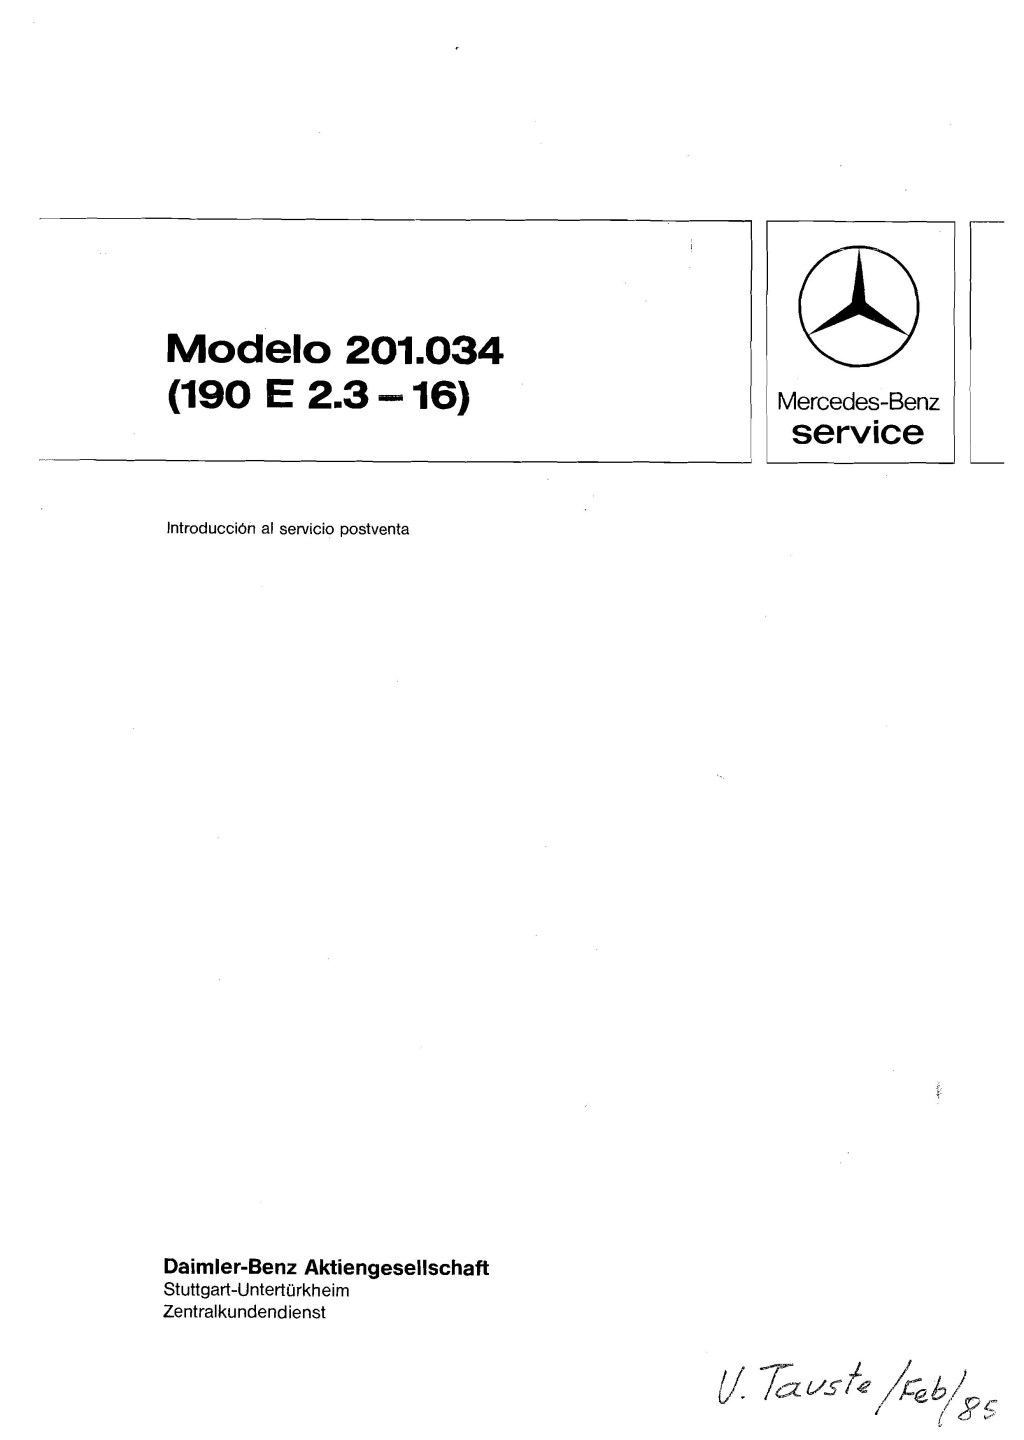 Picture of: Mercedes Benz e Repair Manual by JosephSmithB – Issuu